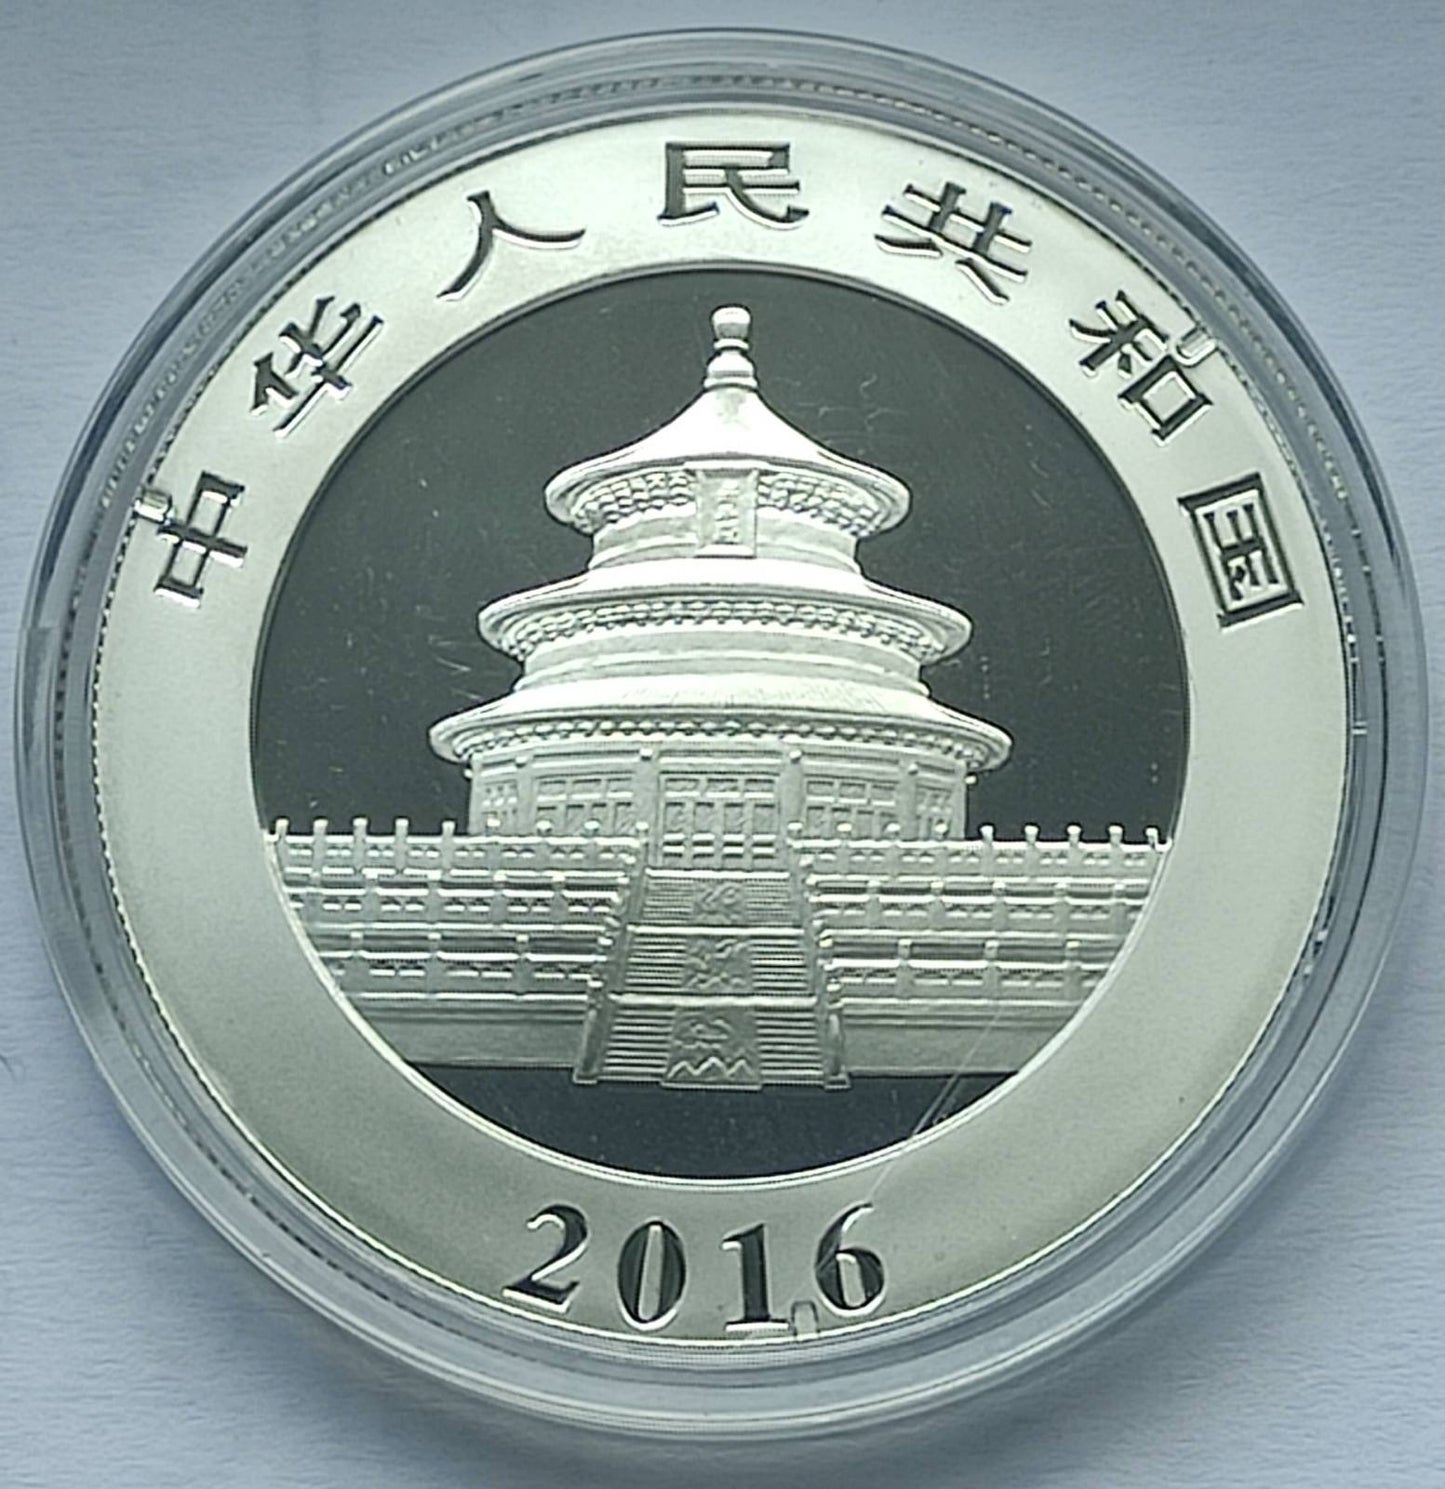 2016 China Panda 30 grams Silver Coin in Capsule (note: contains toning)